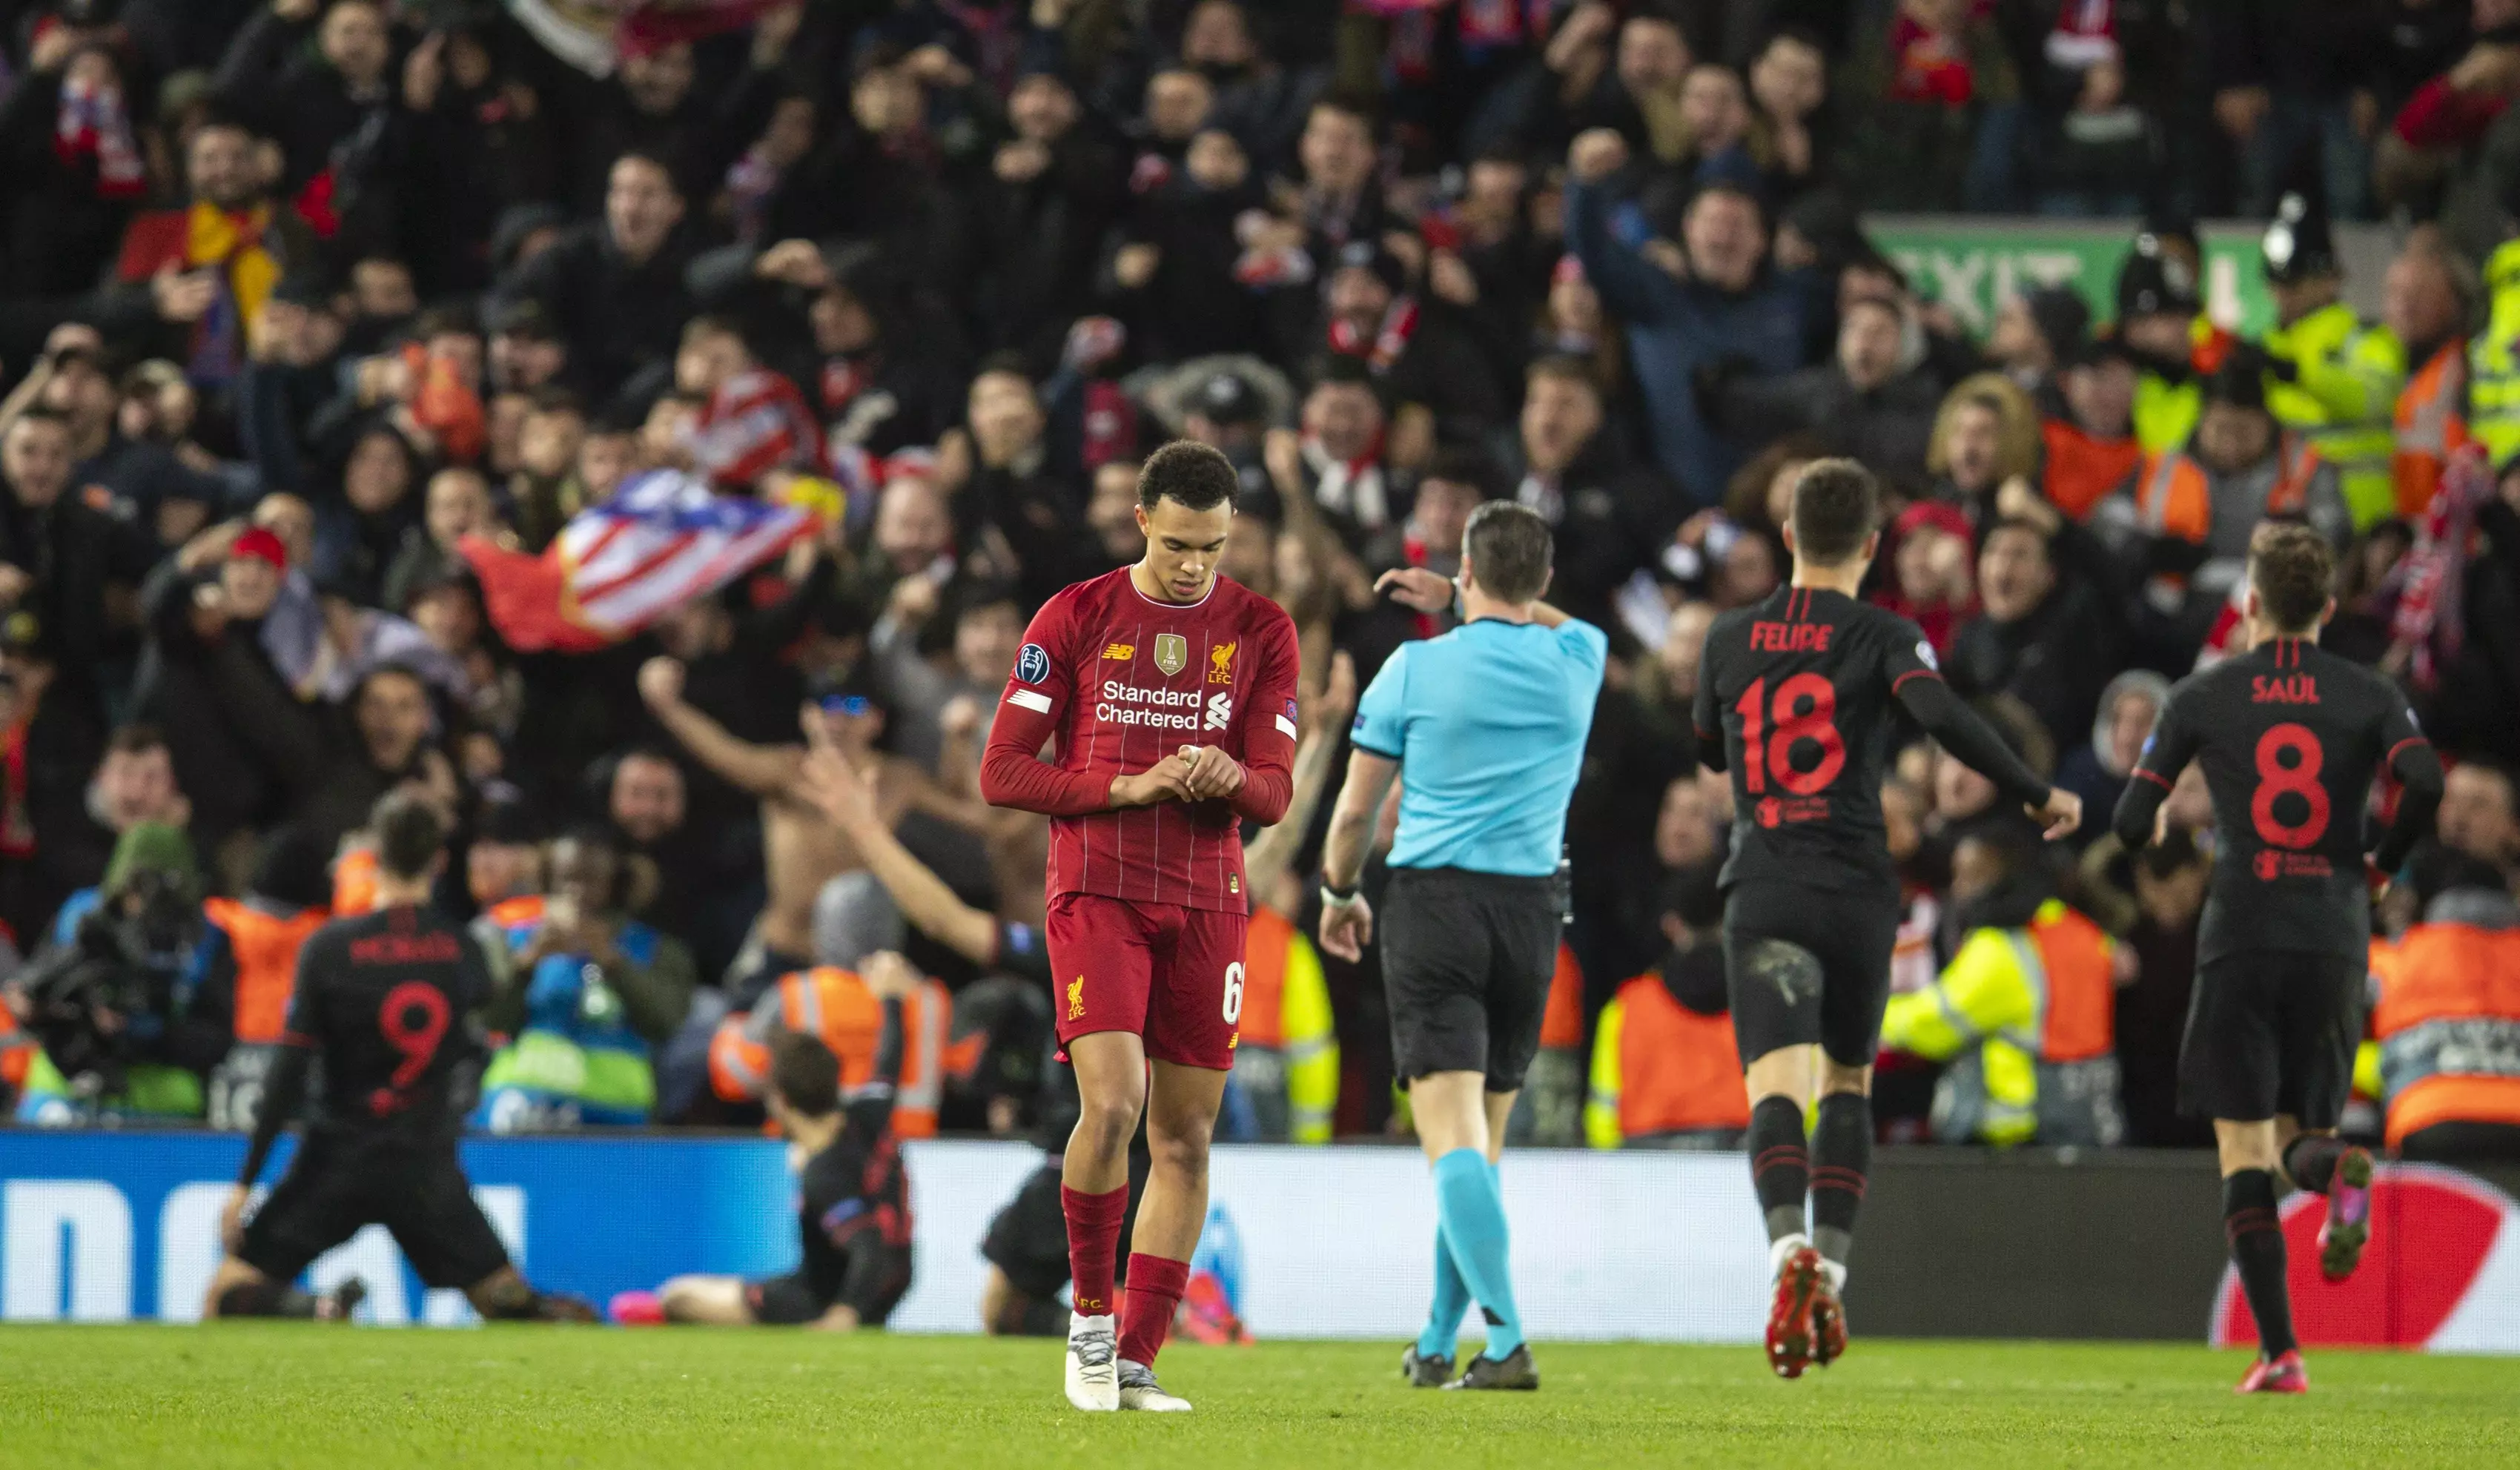 Liverpool were knocked out by Atletico Madrid last season. Image: PA Images